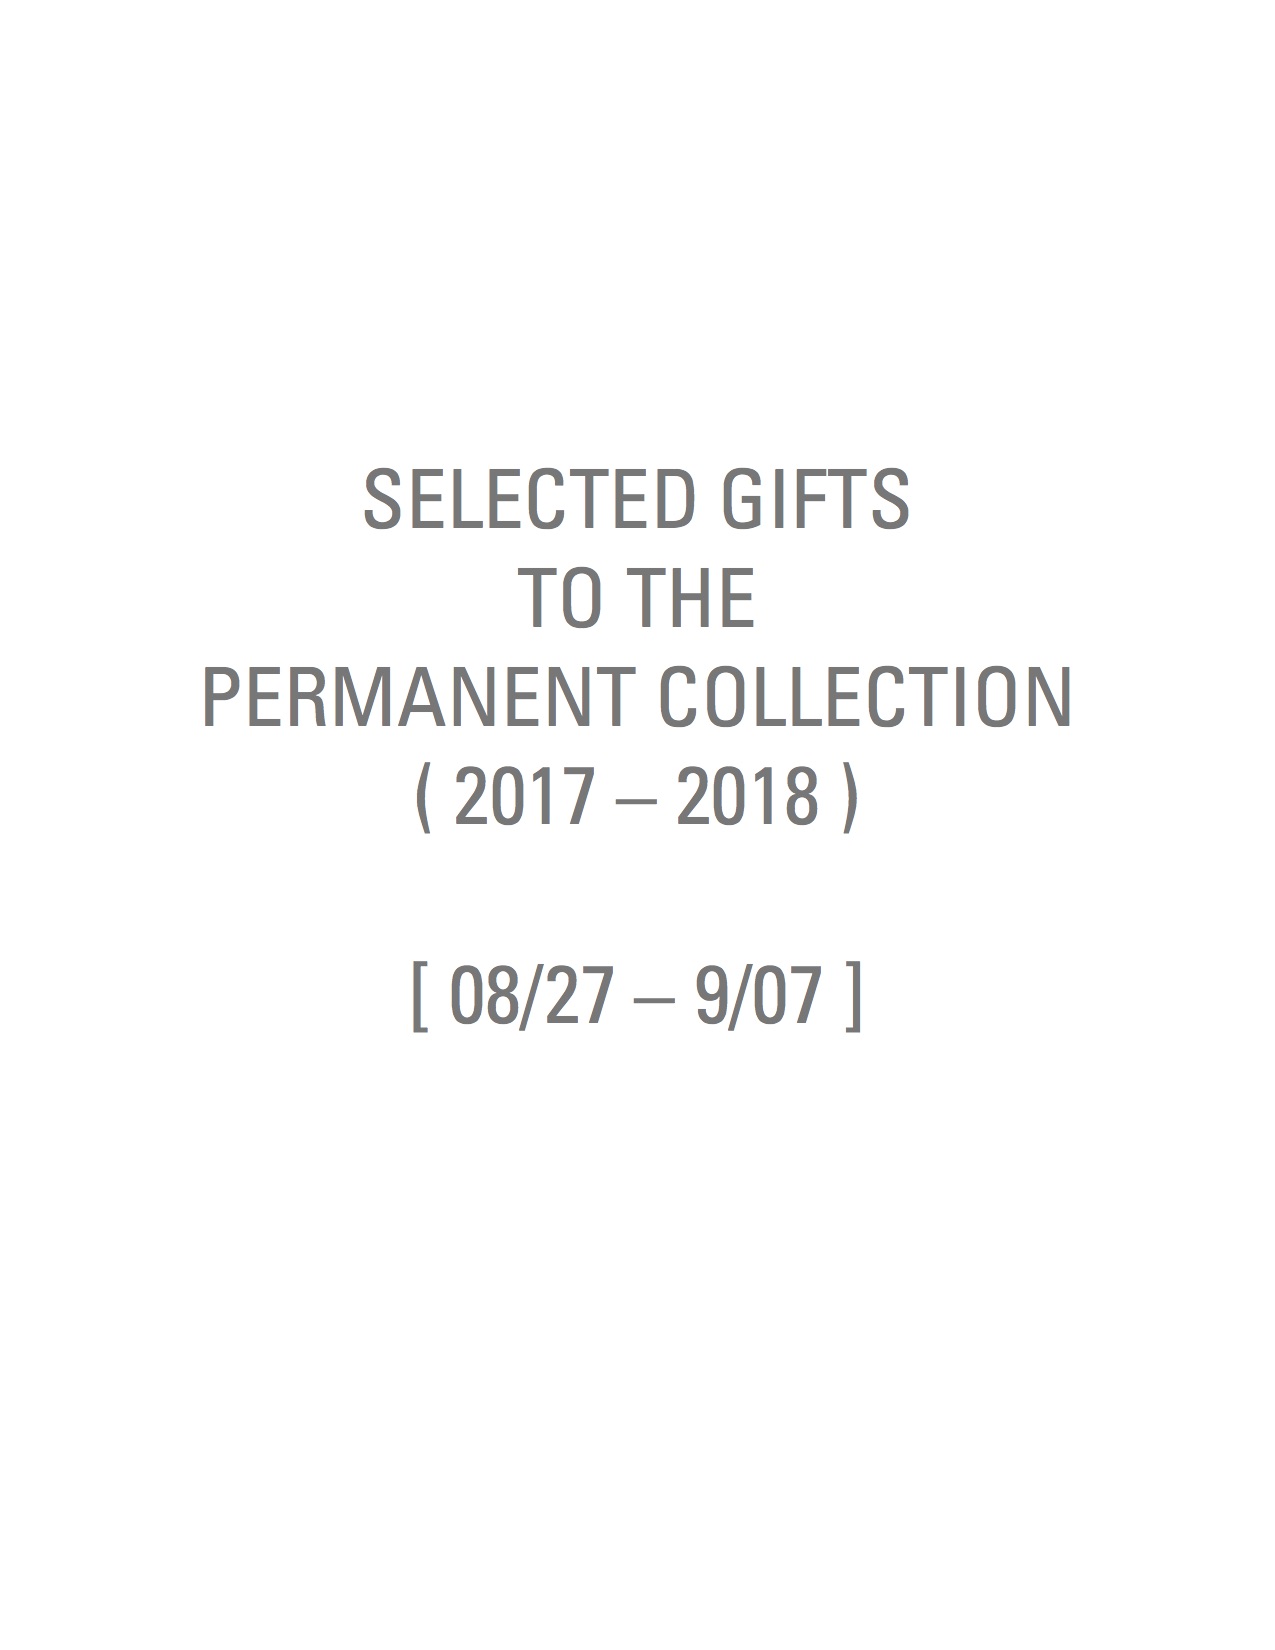 Selected Gifts to the Permanent Collection (2017–2018), FLEX space exhibition, On view August 27–September 7, 2018 (Copy)